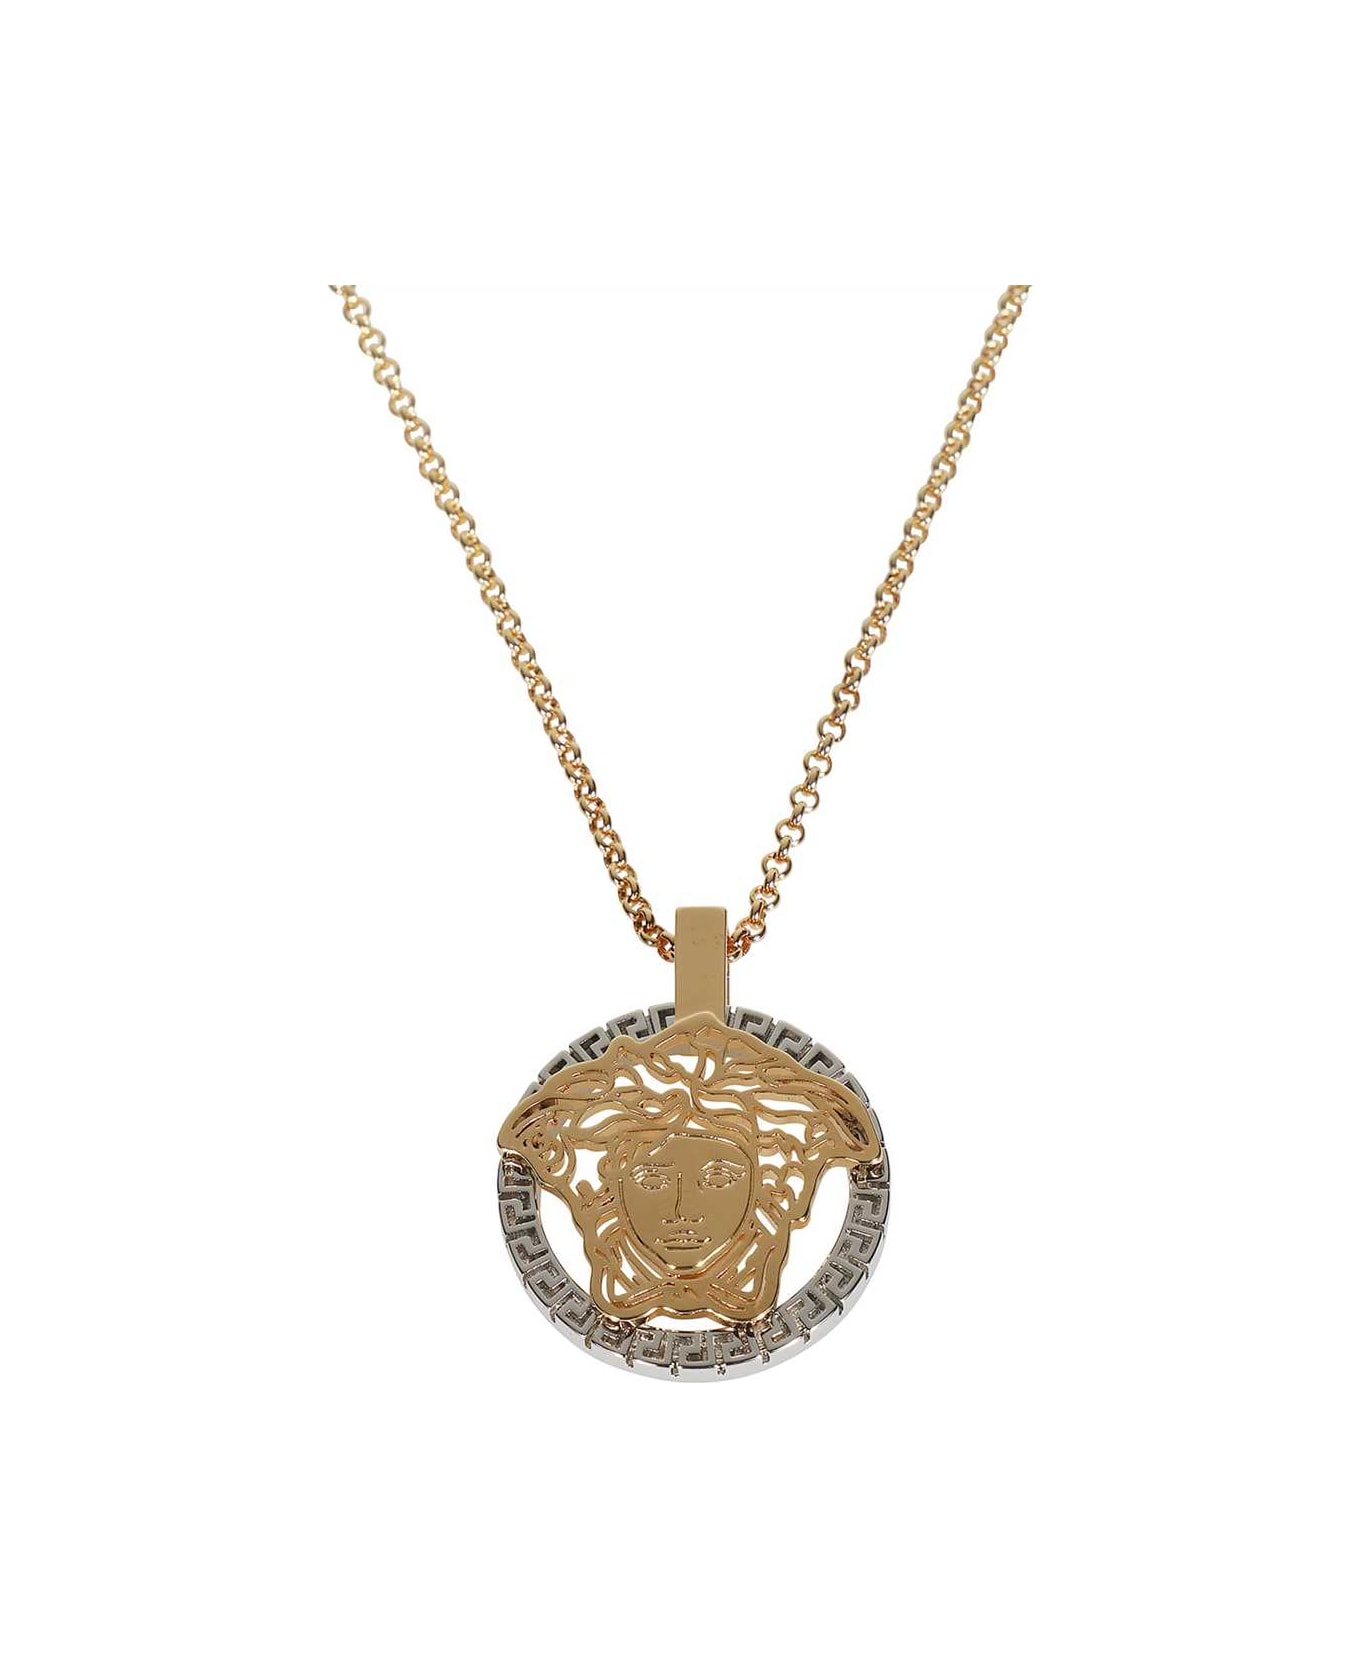 Versace Decorative Pendant Necklace - Gold ネックレス